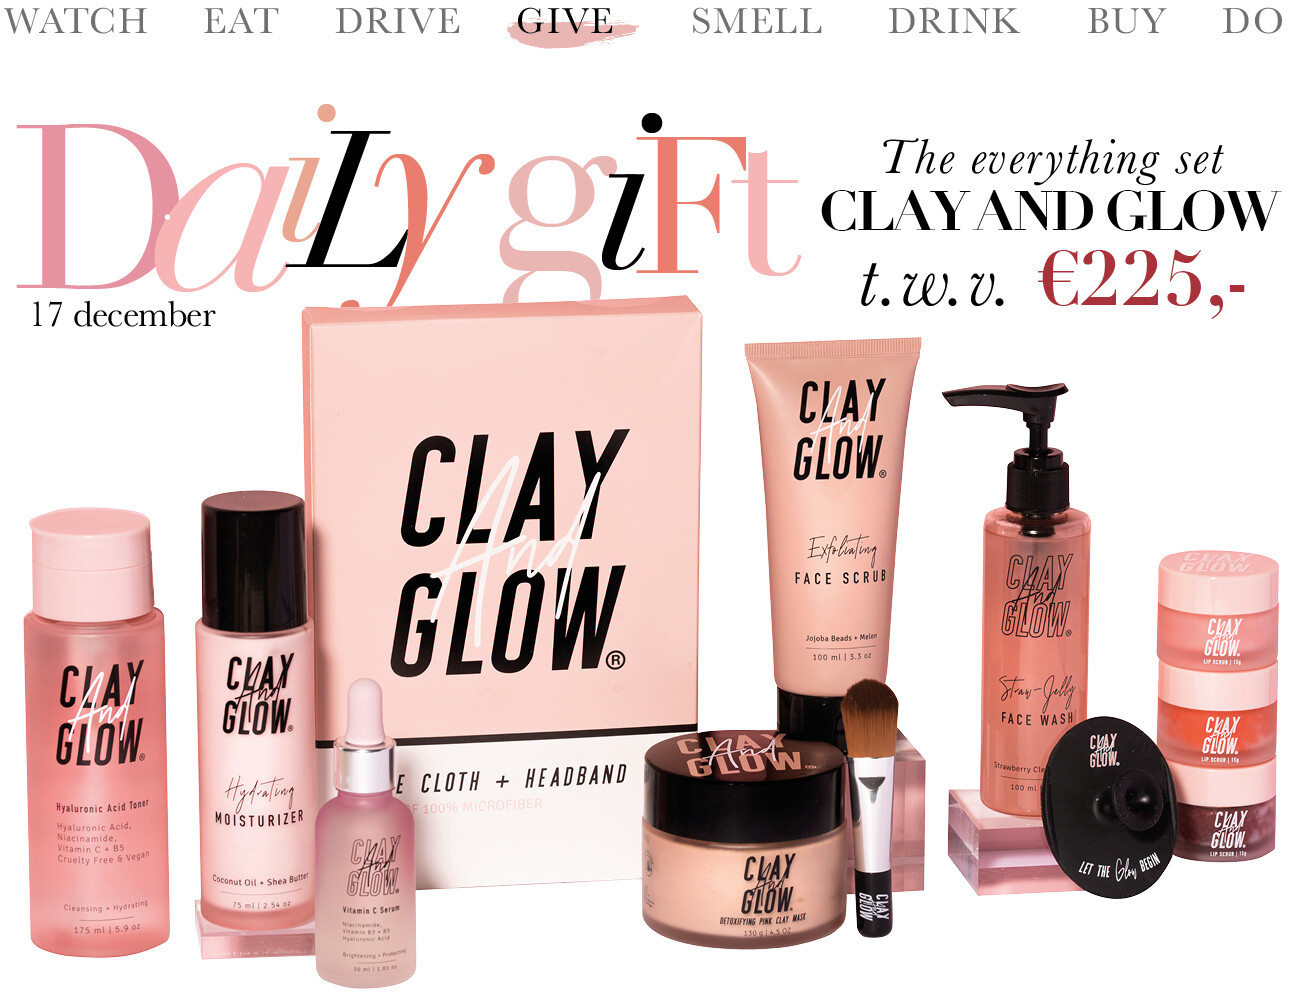 Today We Give Clay & Glow